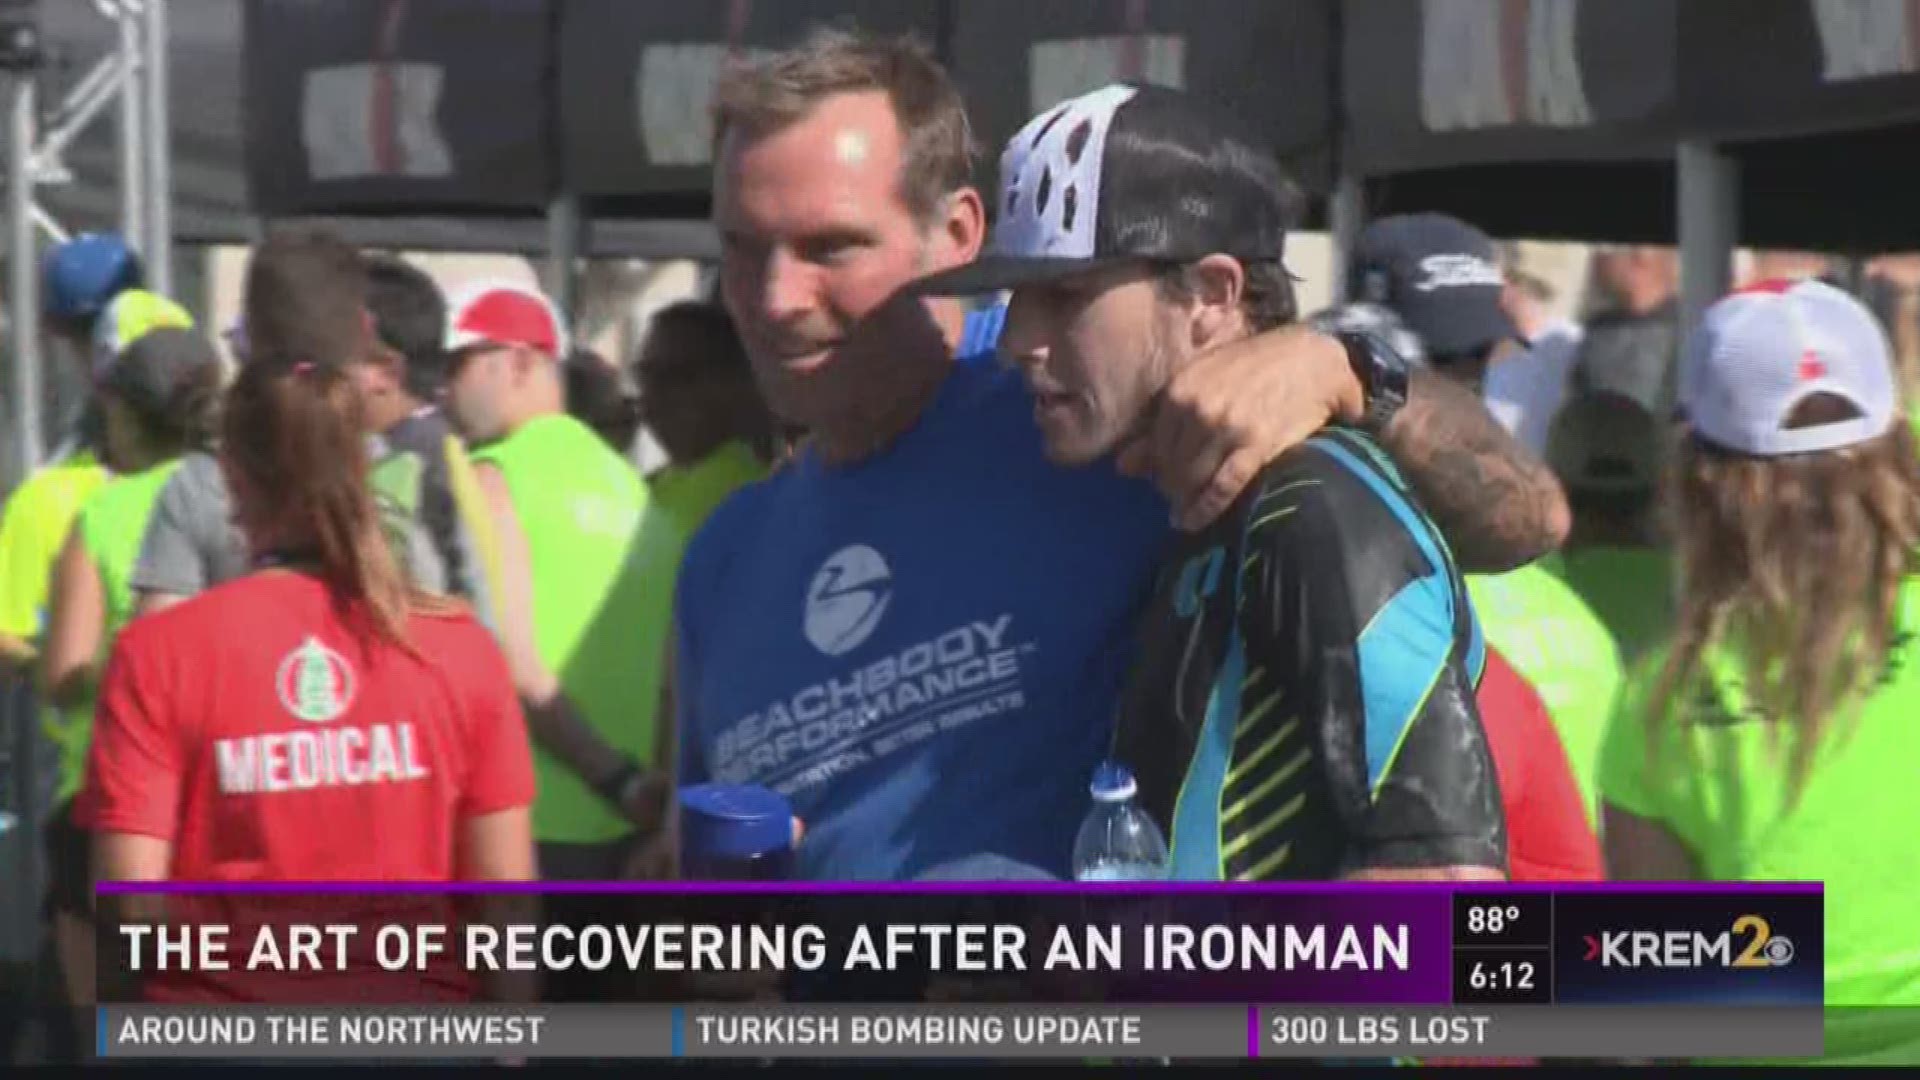 Athletes recover from doing an Ironman